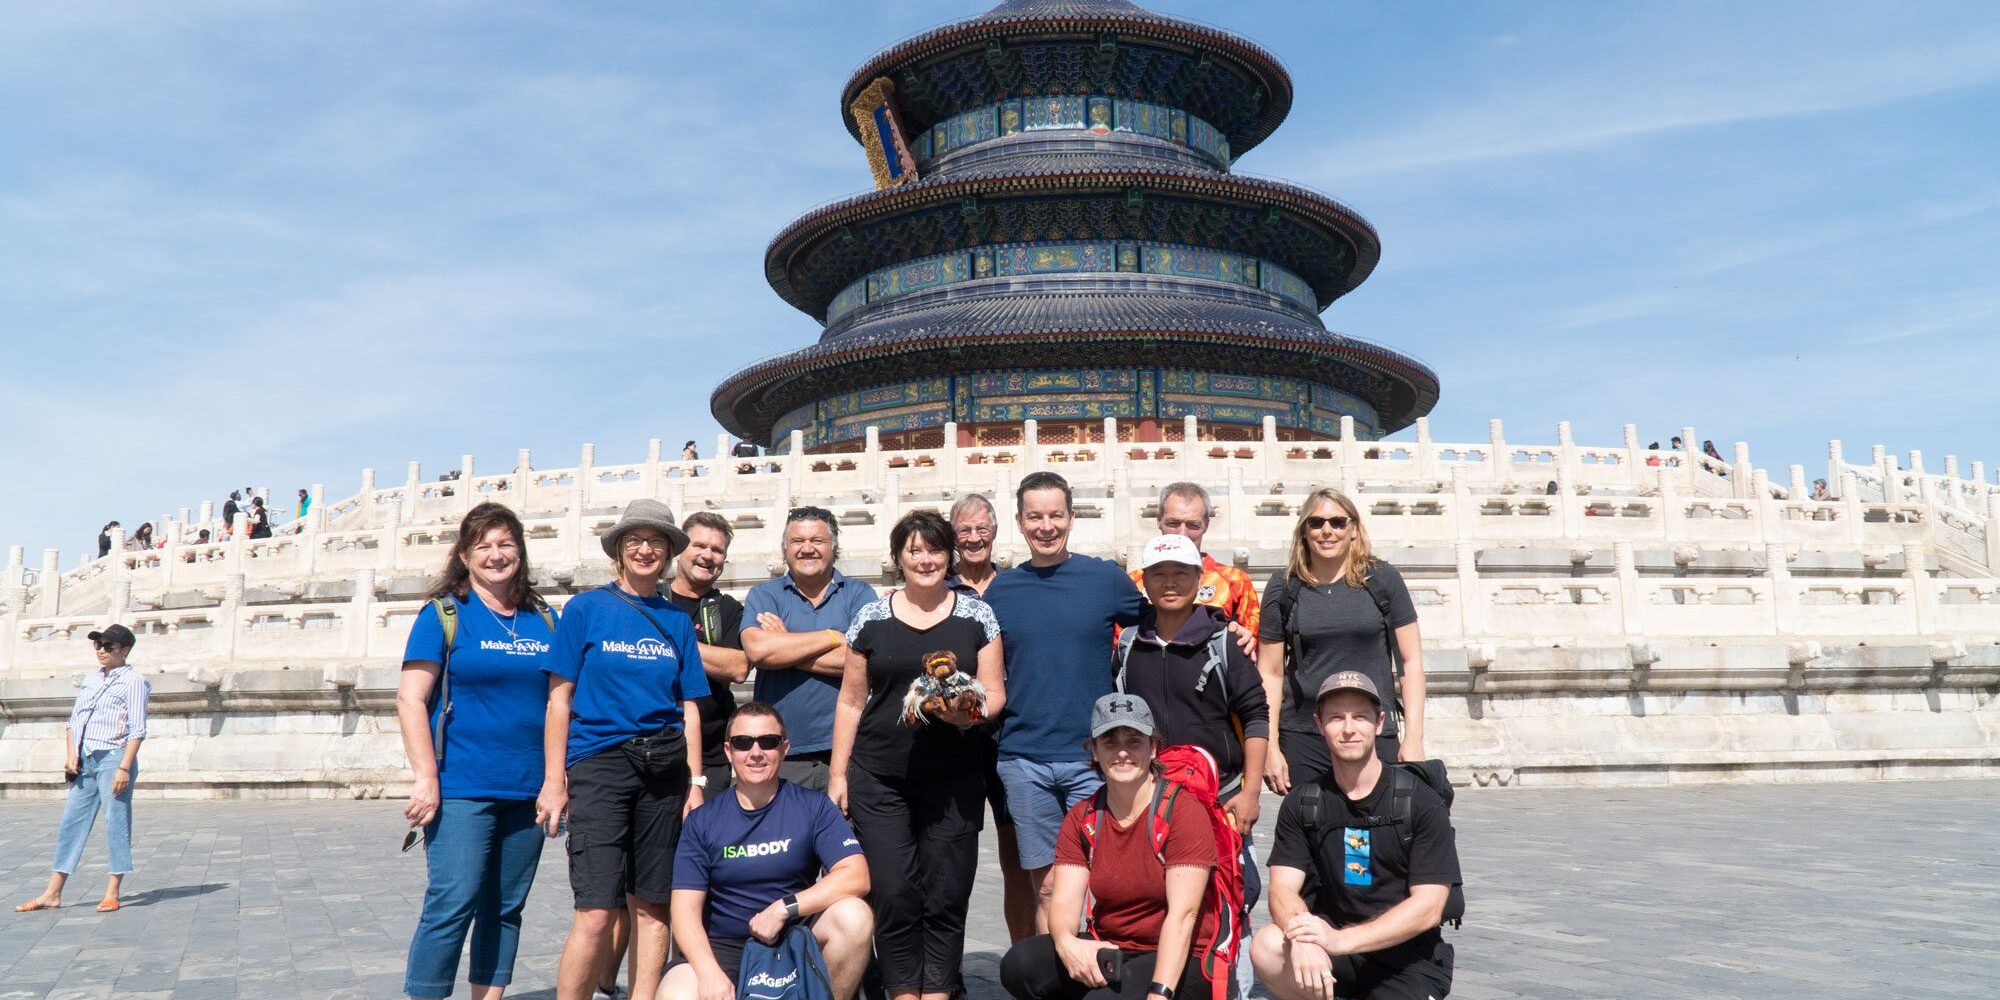 Team photo in front of Forbidden City, China for Make-A-Wish Foundation